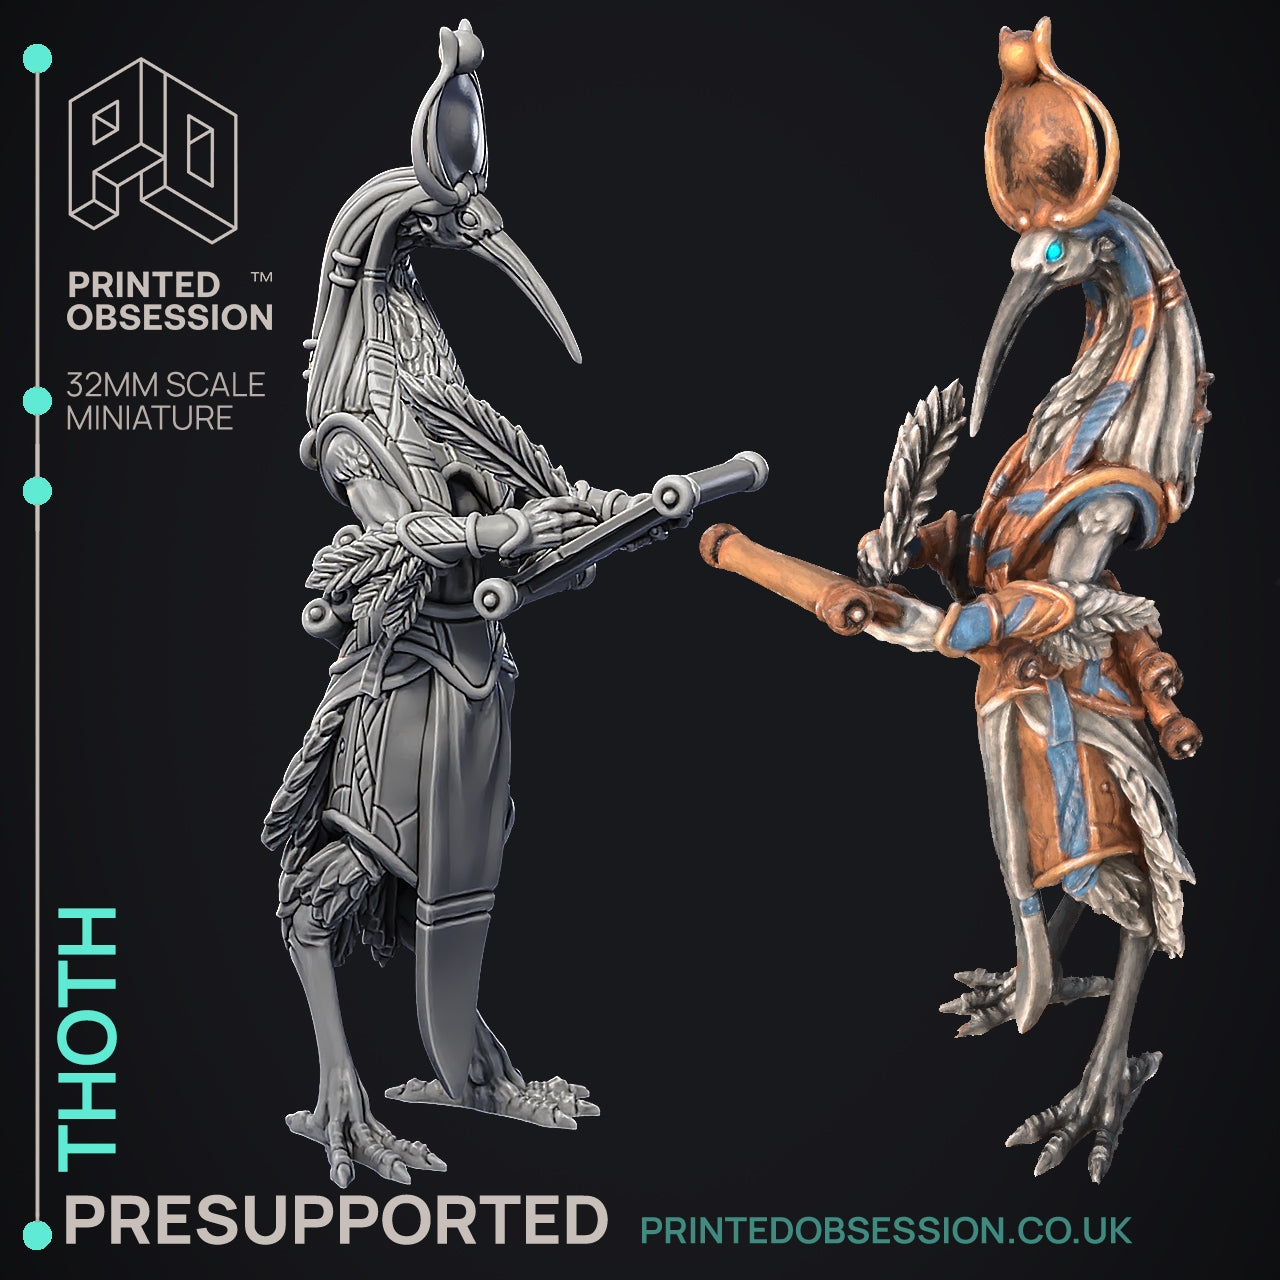 Thoth - Court of Anubis - The Printed Obsession - Table-top mini, 3D Printed Collectable for painting and playing!